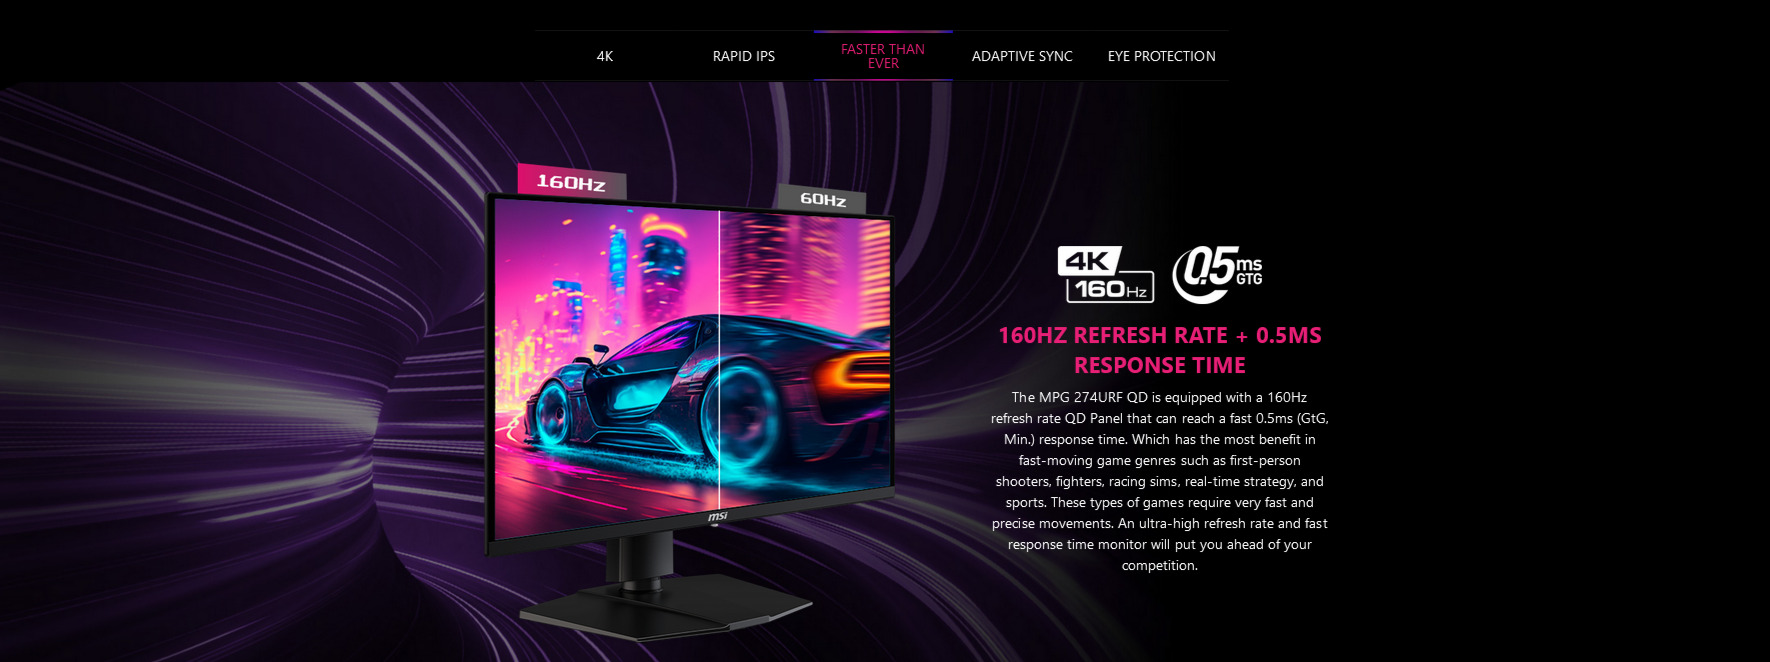 A large marketing image providing additional information about the product MSI MPG 274URF QD 27" 4K 160Hz Rapid IPS Monitor - Additional alt info not provided